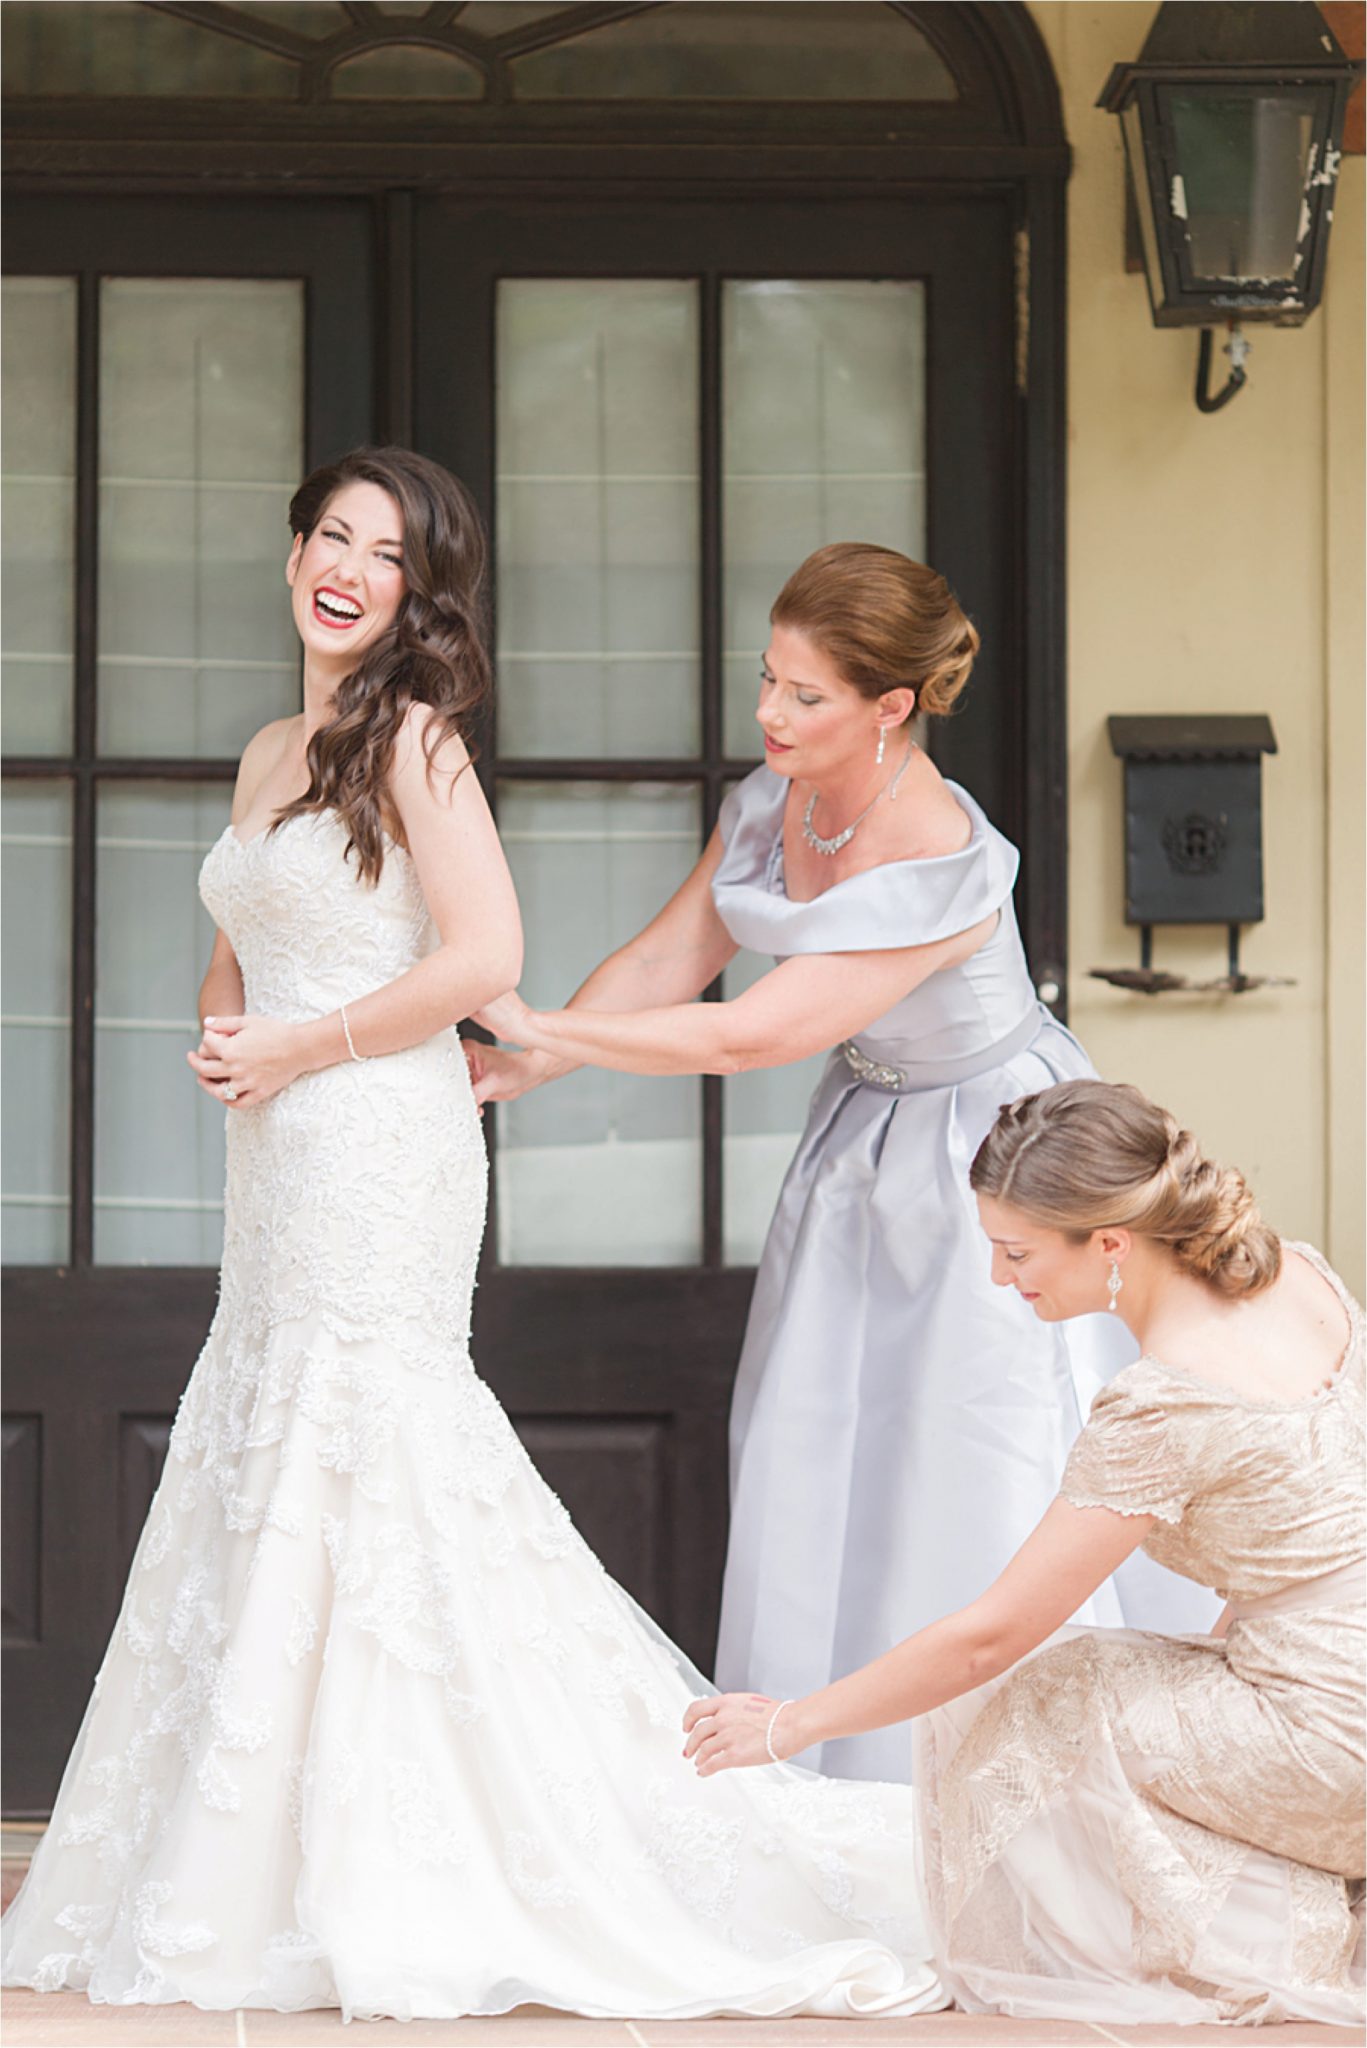 wedding day-wedding photographer-mother-daughter-sister-maid of honor-bride-mother of the bride